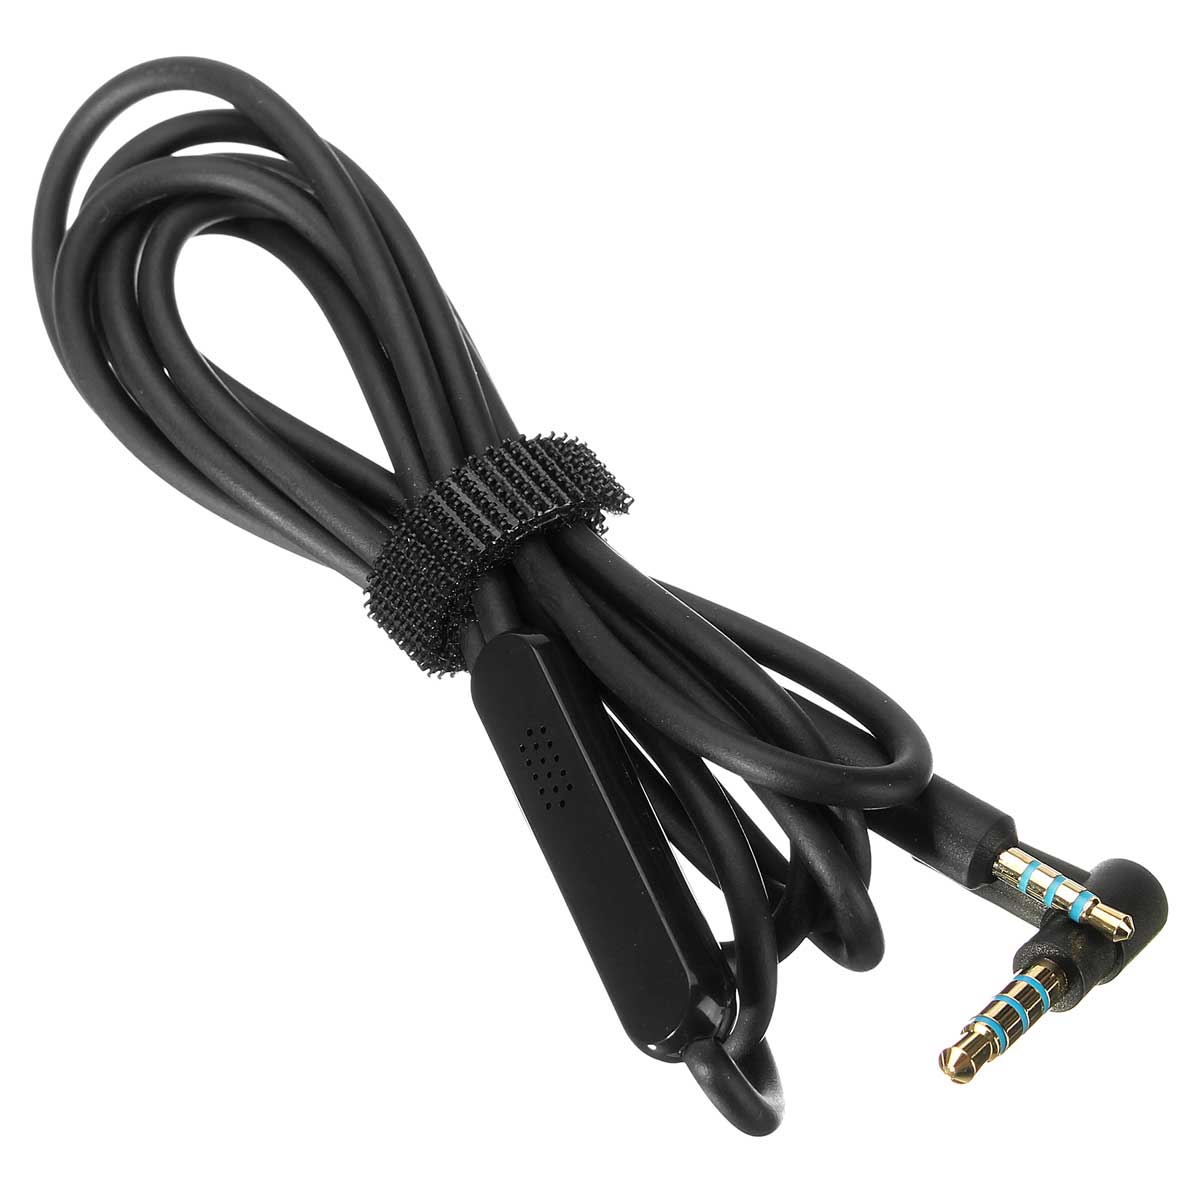 SAWAKE-Replace-Audio-25-to-35mm-Cable-for-Bose-Quiet-Comfort-QC25-Headphone-MIC-1160847